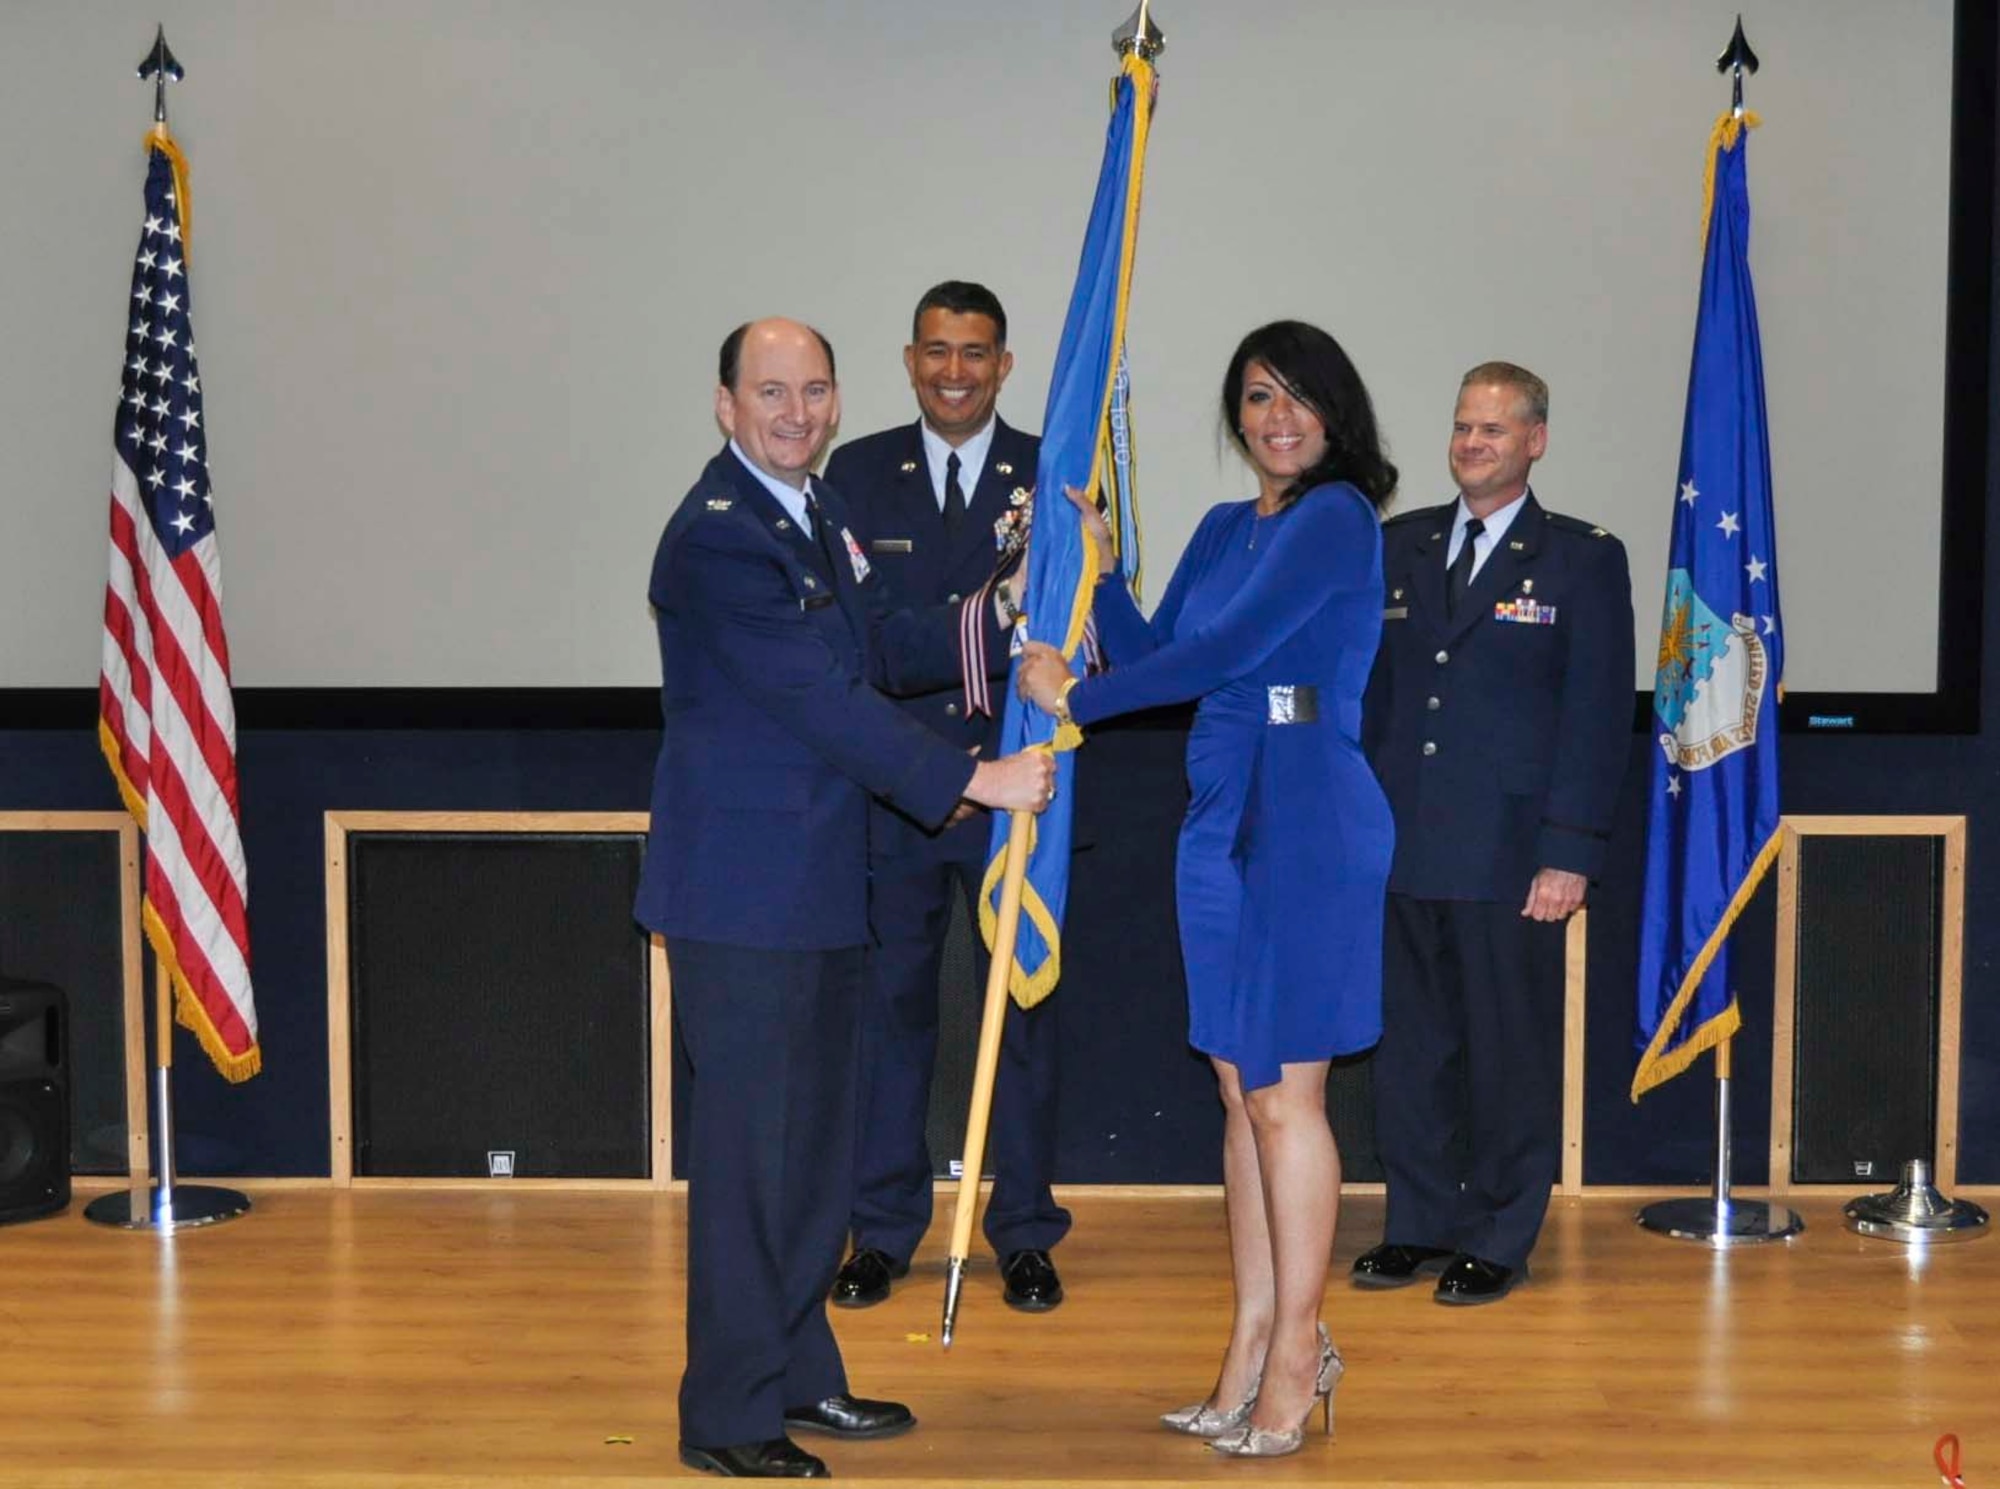 Belkis Lane accepts the 433rd Airlift Wing guidon from Col. Thomas K. Smith, Jr., 433rd AW commander, during the Honorary Commanders Induction Ceremony held at Joint Base San Antonio-Lackland April 30, 2016. Lane currently serves as the chief executive officer for The Restaurant Fanatic and will be serving as the 433rd Aeromedical Staging Squadron Honorary Commander. (U.S. Air Force photo/Senior Airman Bryan Swink)